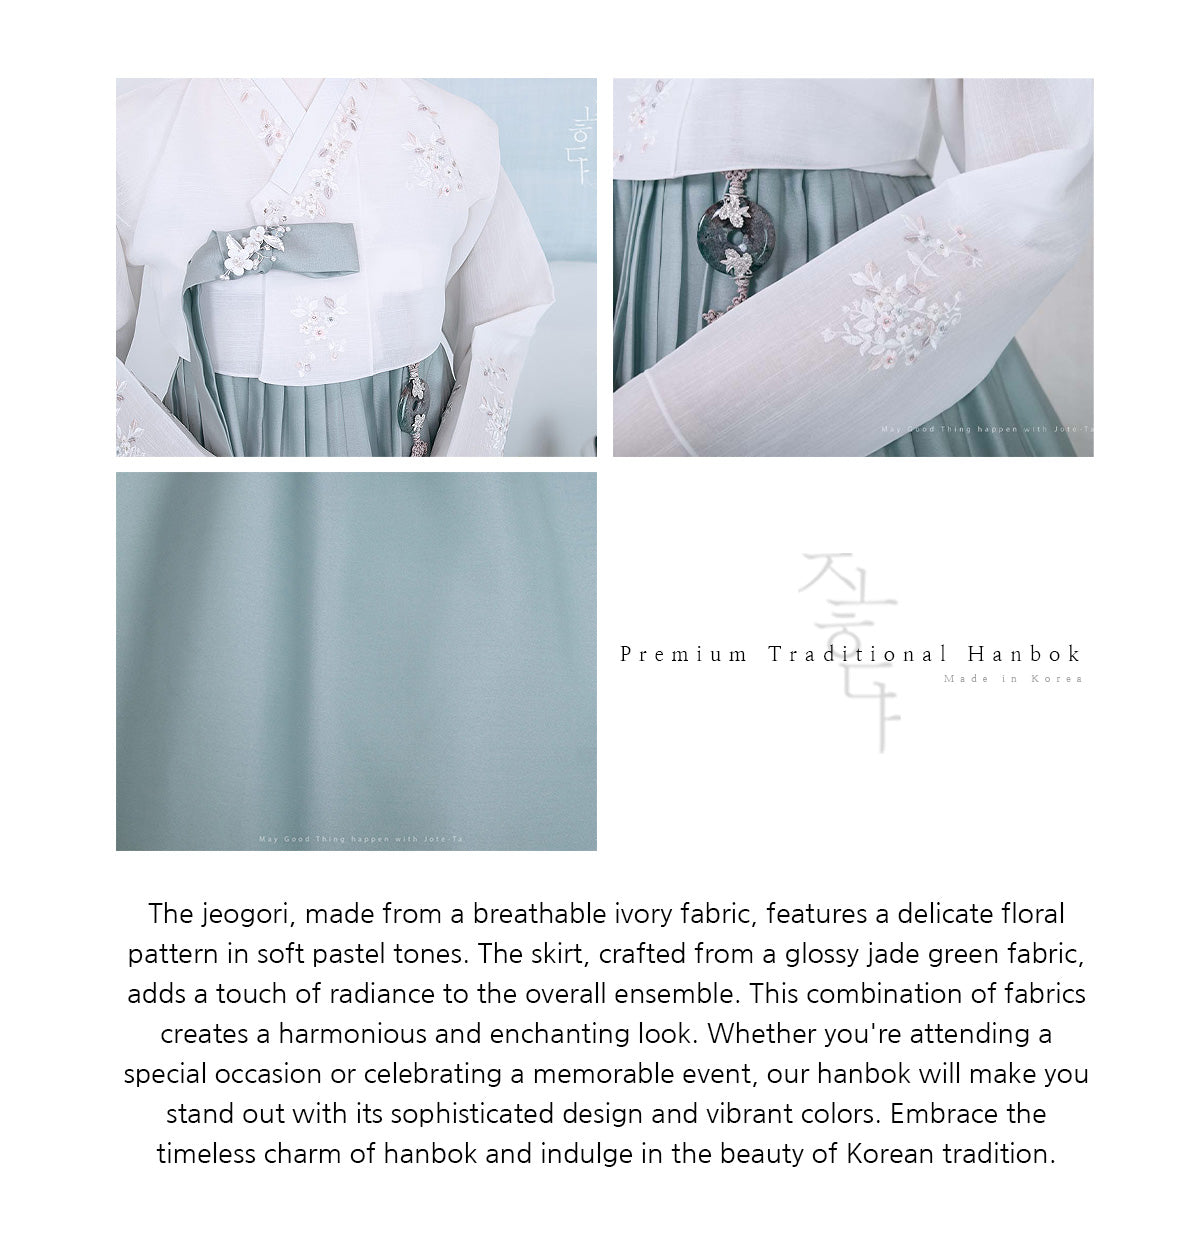 This traditional women's hanbok is made using traditional techniques, enhancing its elegance and sophistication.